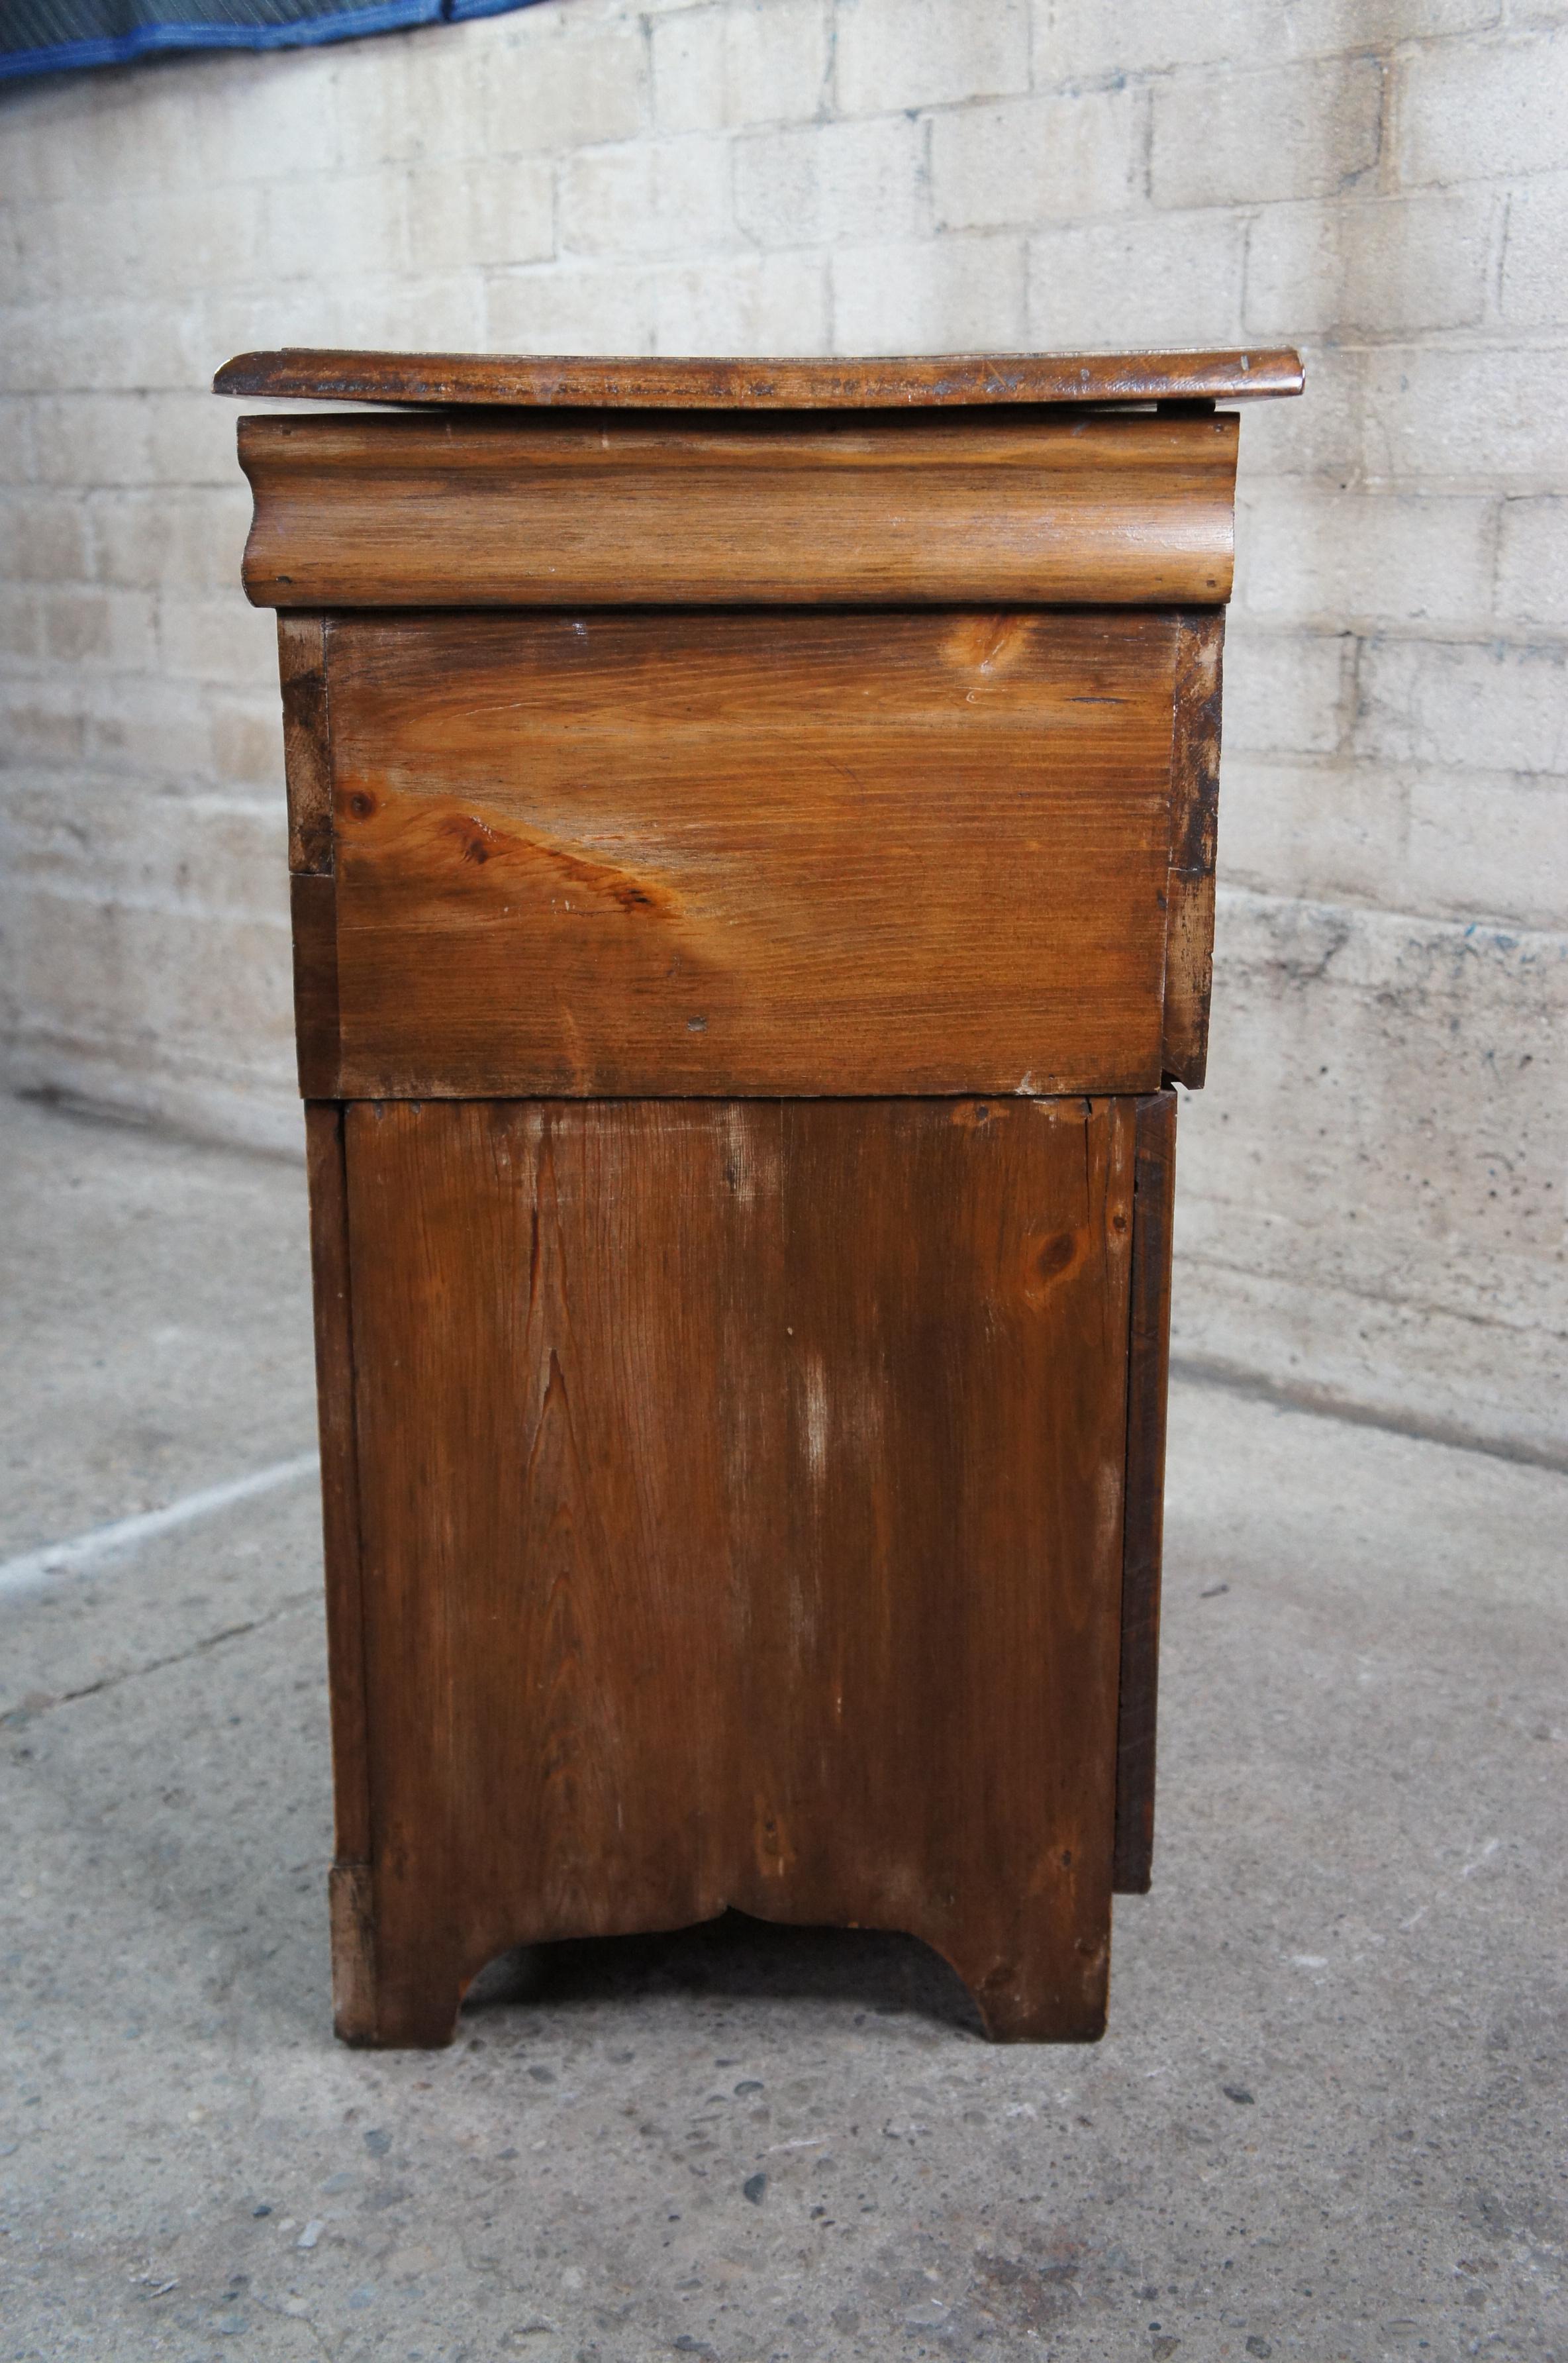 Early American Antique Pine Dough Box Bin Speaker Music Cabinet Trunk Chest For Sale 2